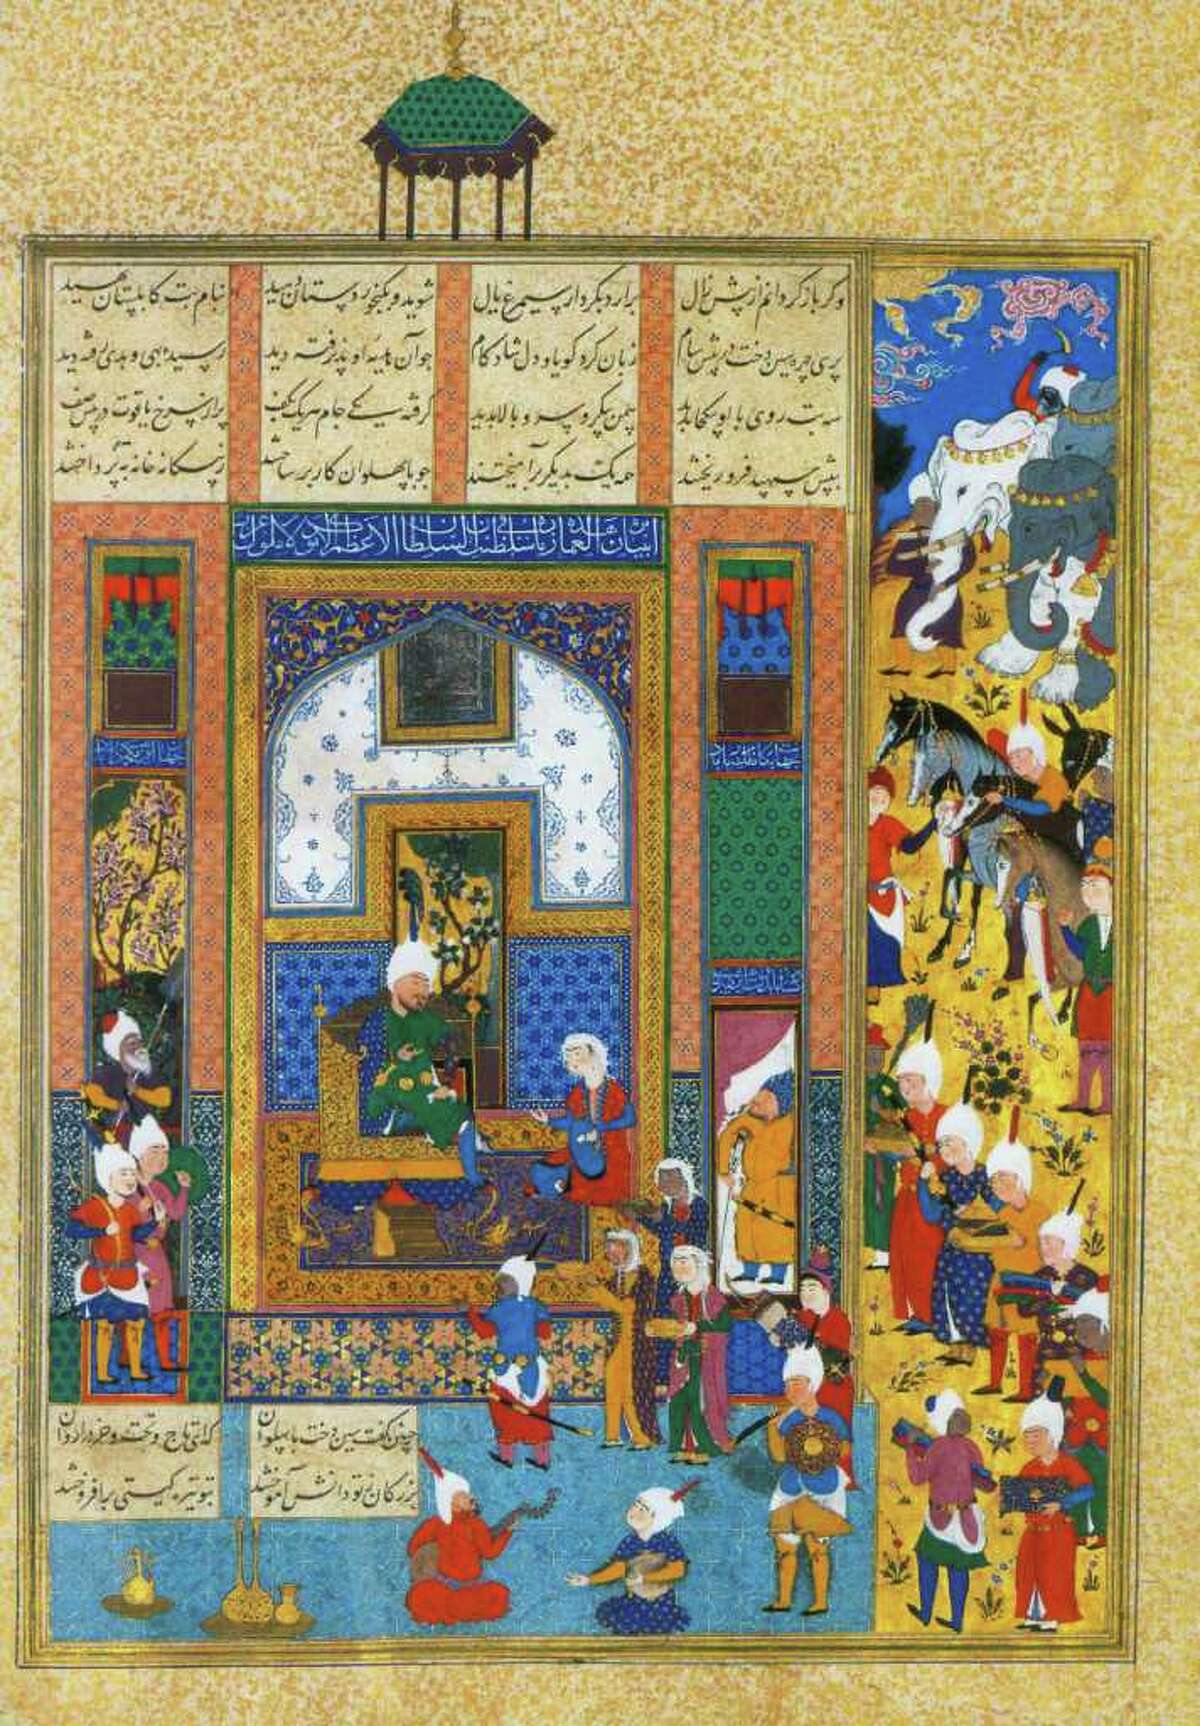 Sindukht Comes to Sam Bearing Gifts Folio from the Shahnama (Book of Kings) of Shah Tahmasp Tabriz, Iran, 1525-35 Ink, opaque watercolor, and gold on paper On view in Gifts of the Sultan: The Arts of Giving at the Islamic Courts at the Museum of Fine Arts, Houston